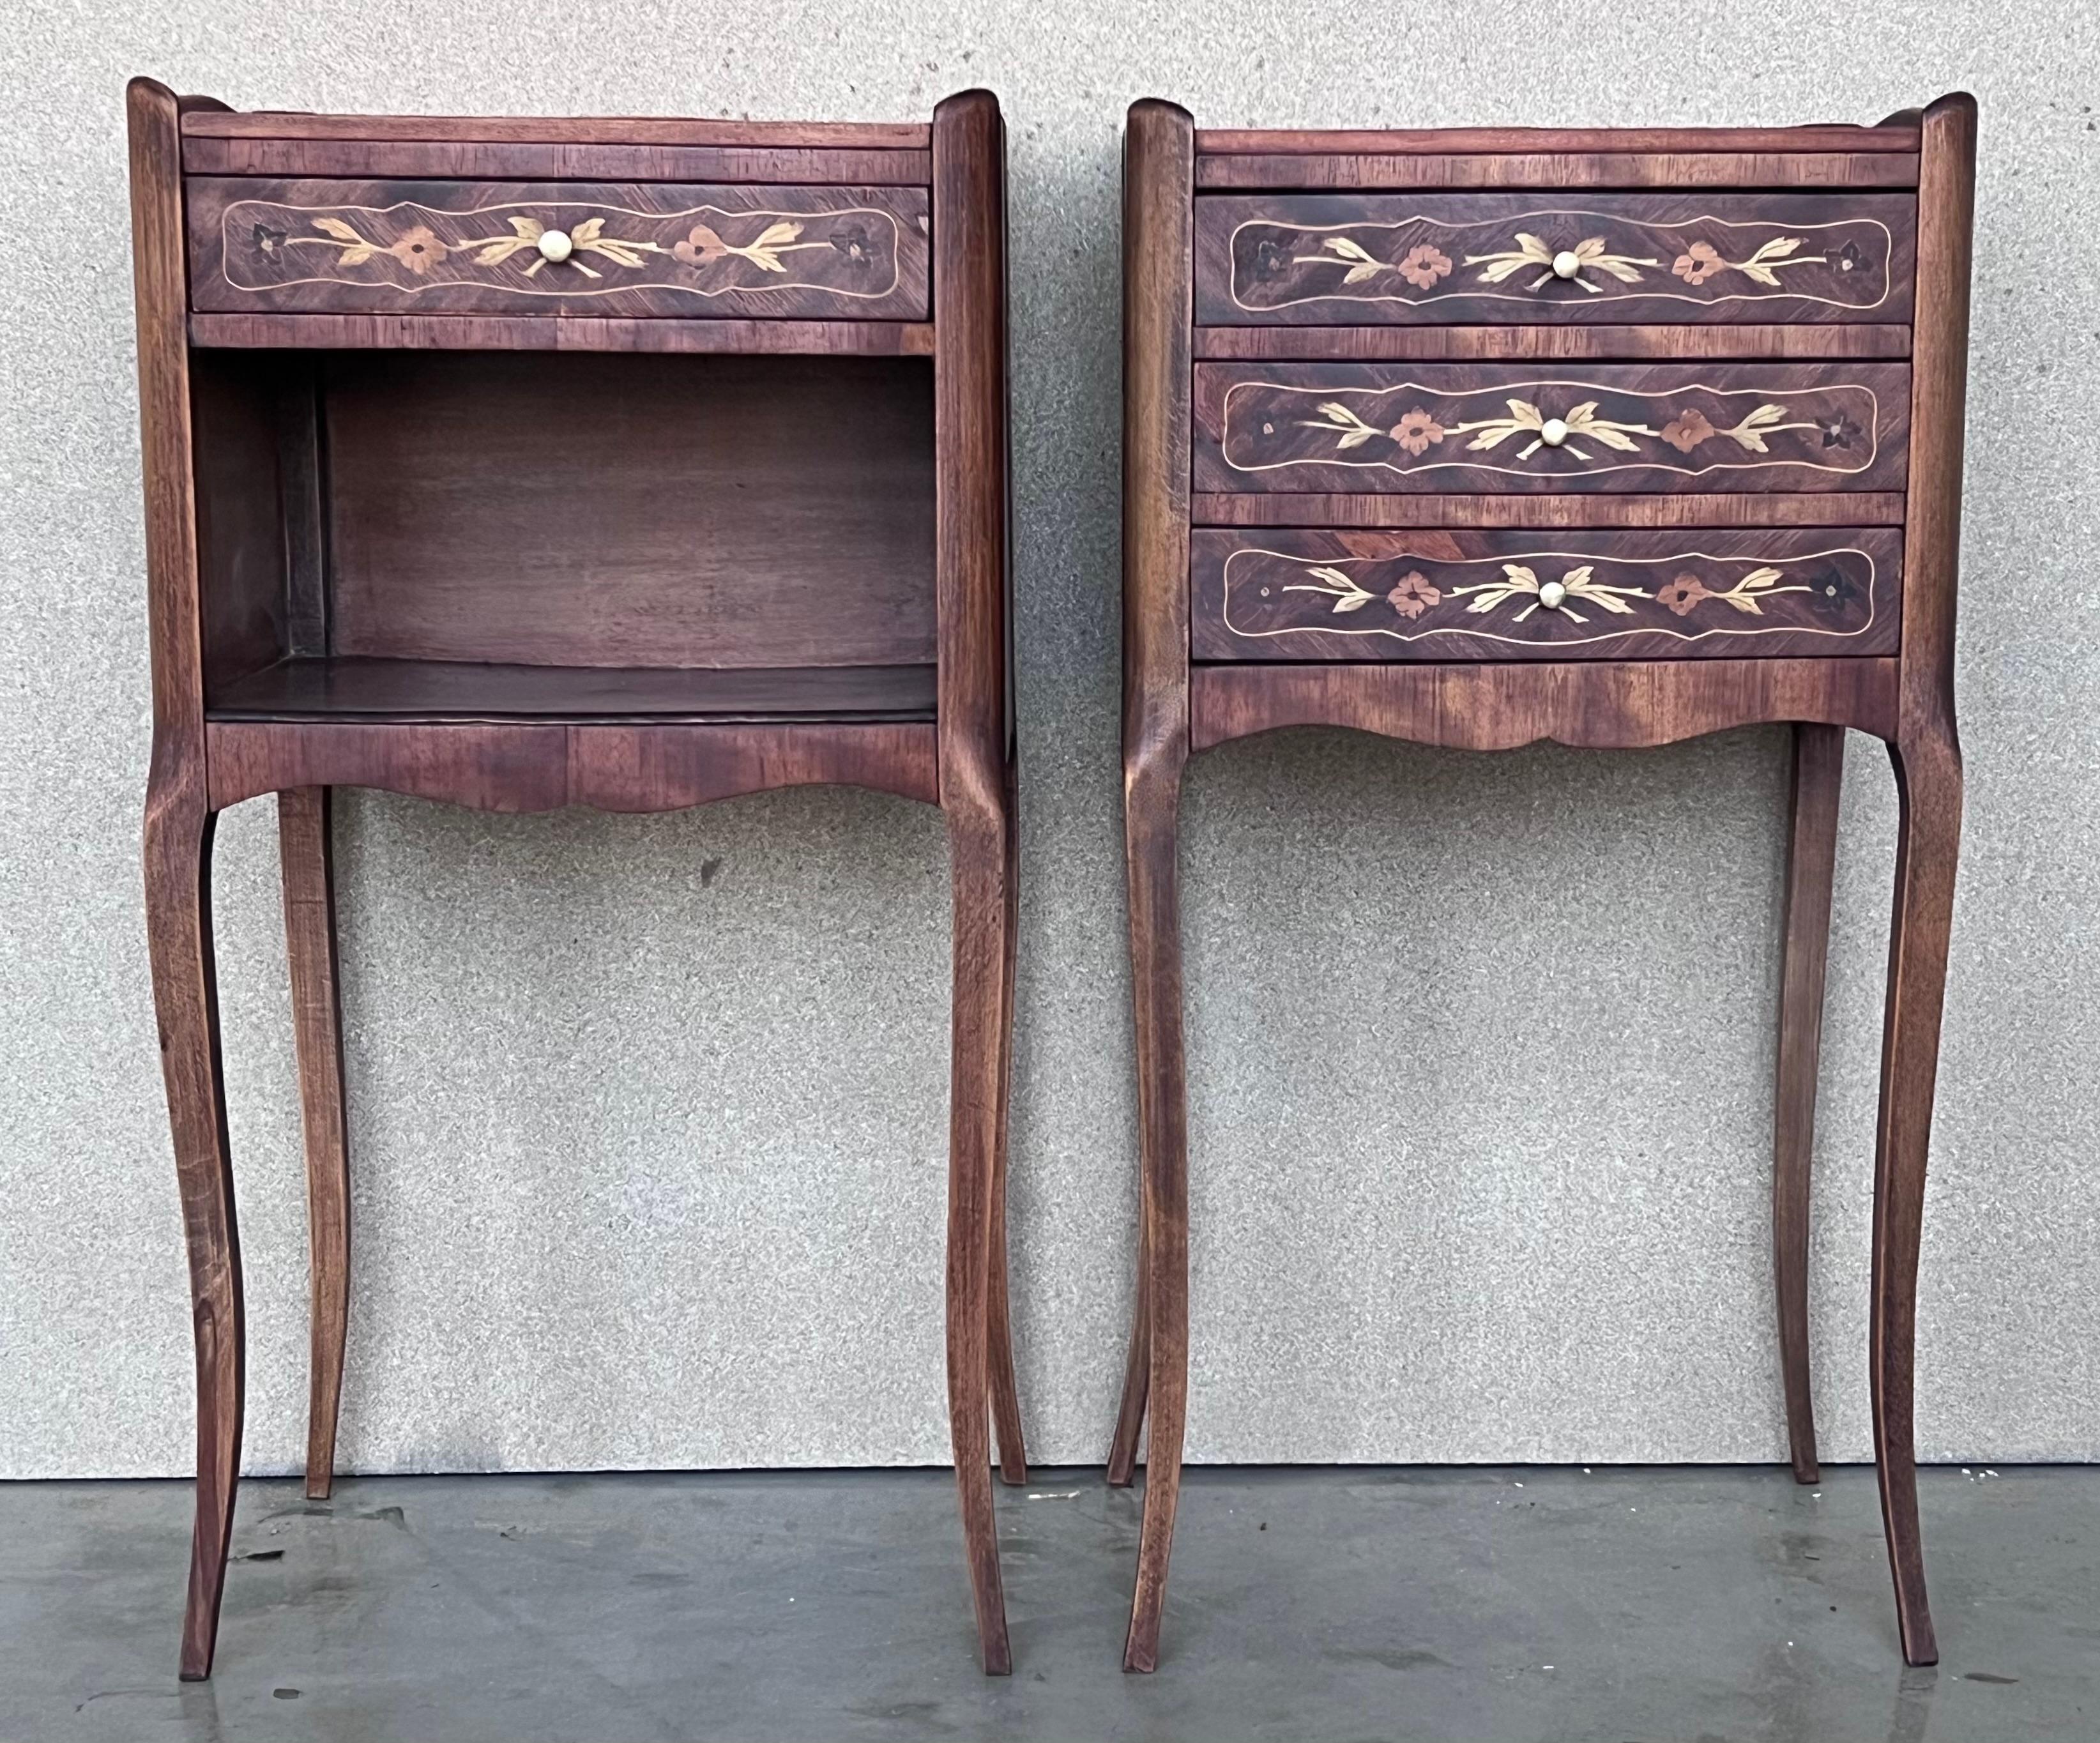 A pretty pair of French, inlaid kingwood, one drawer nightstands with tray accents, circa 1930.
Pair of French Louis XV style walnut bedside tables from the early 20th century. This pair of French 'tables de chevet' was created in the early years